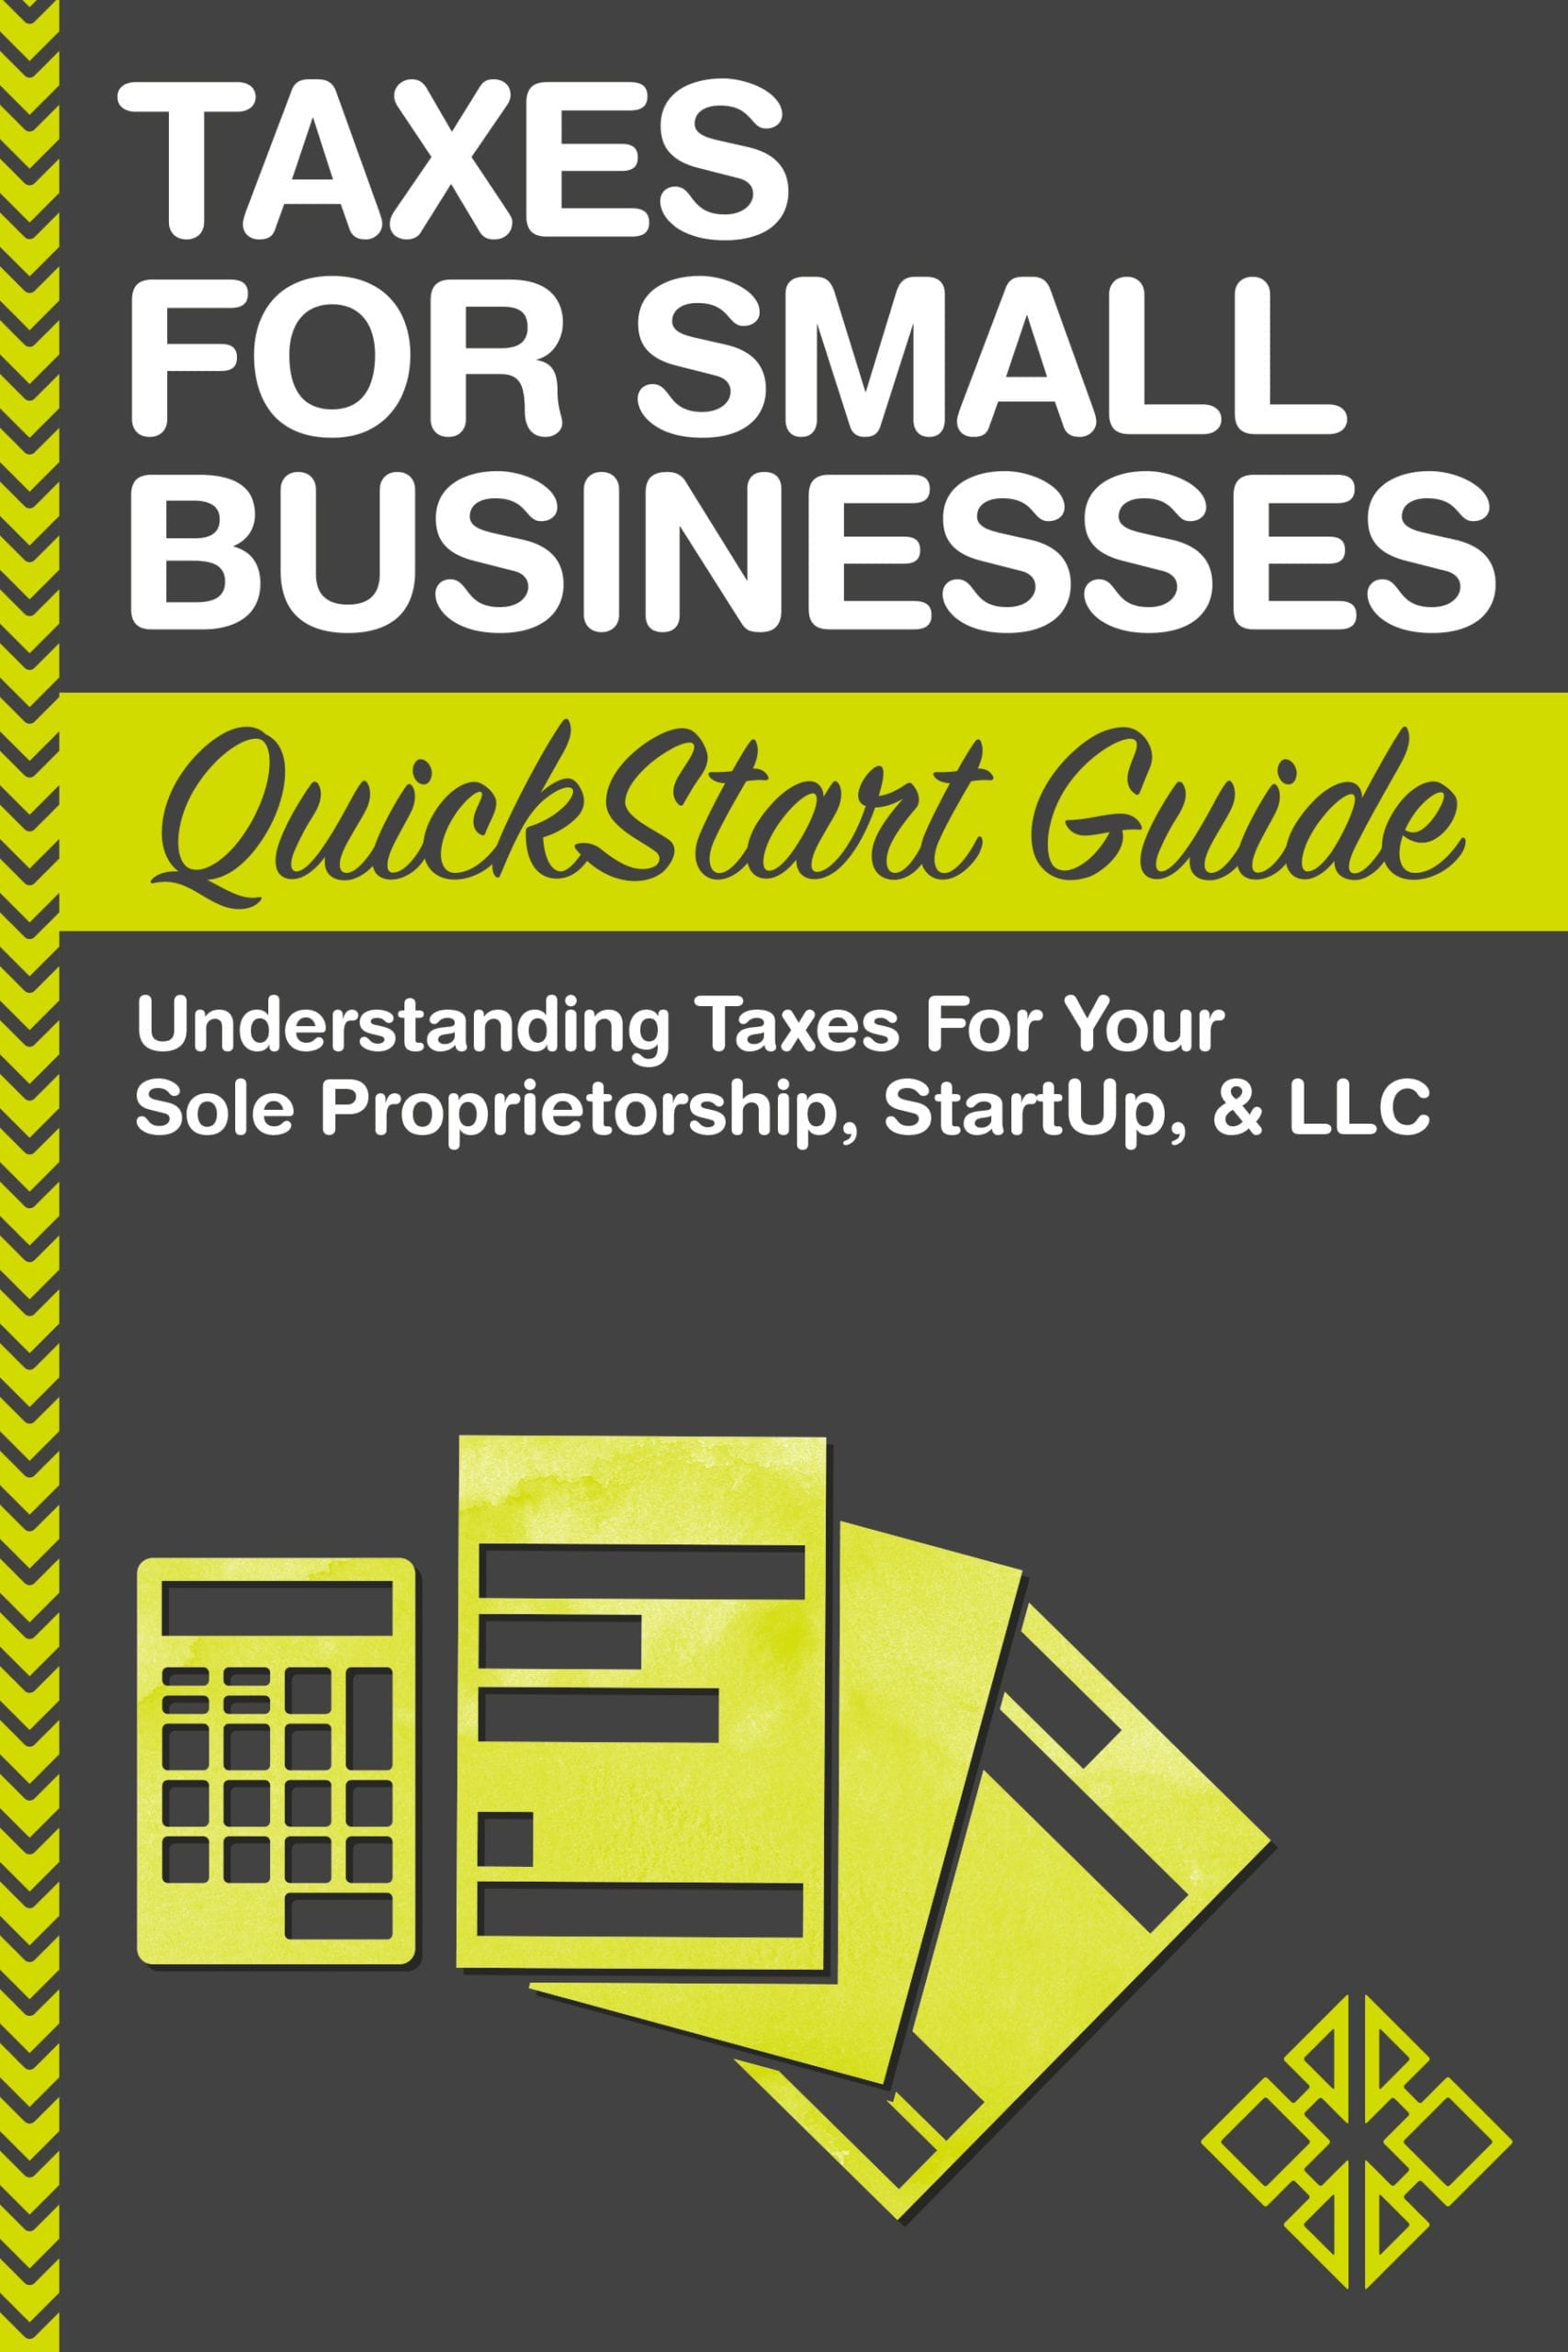 Taxes for Small Businesses Cover